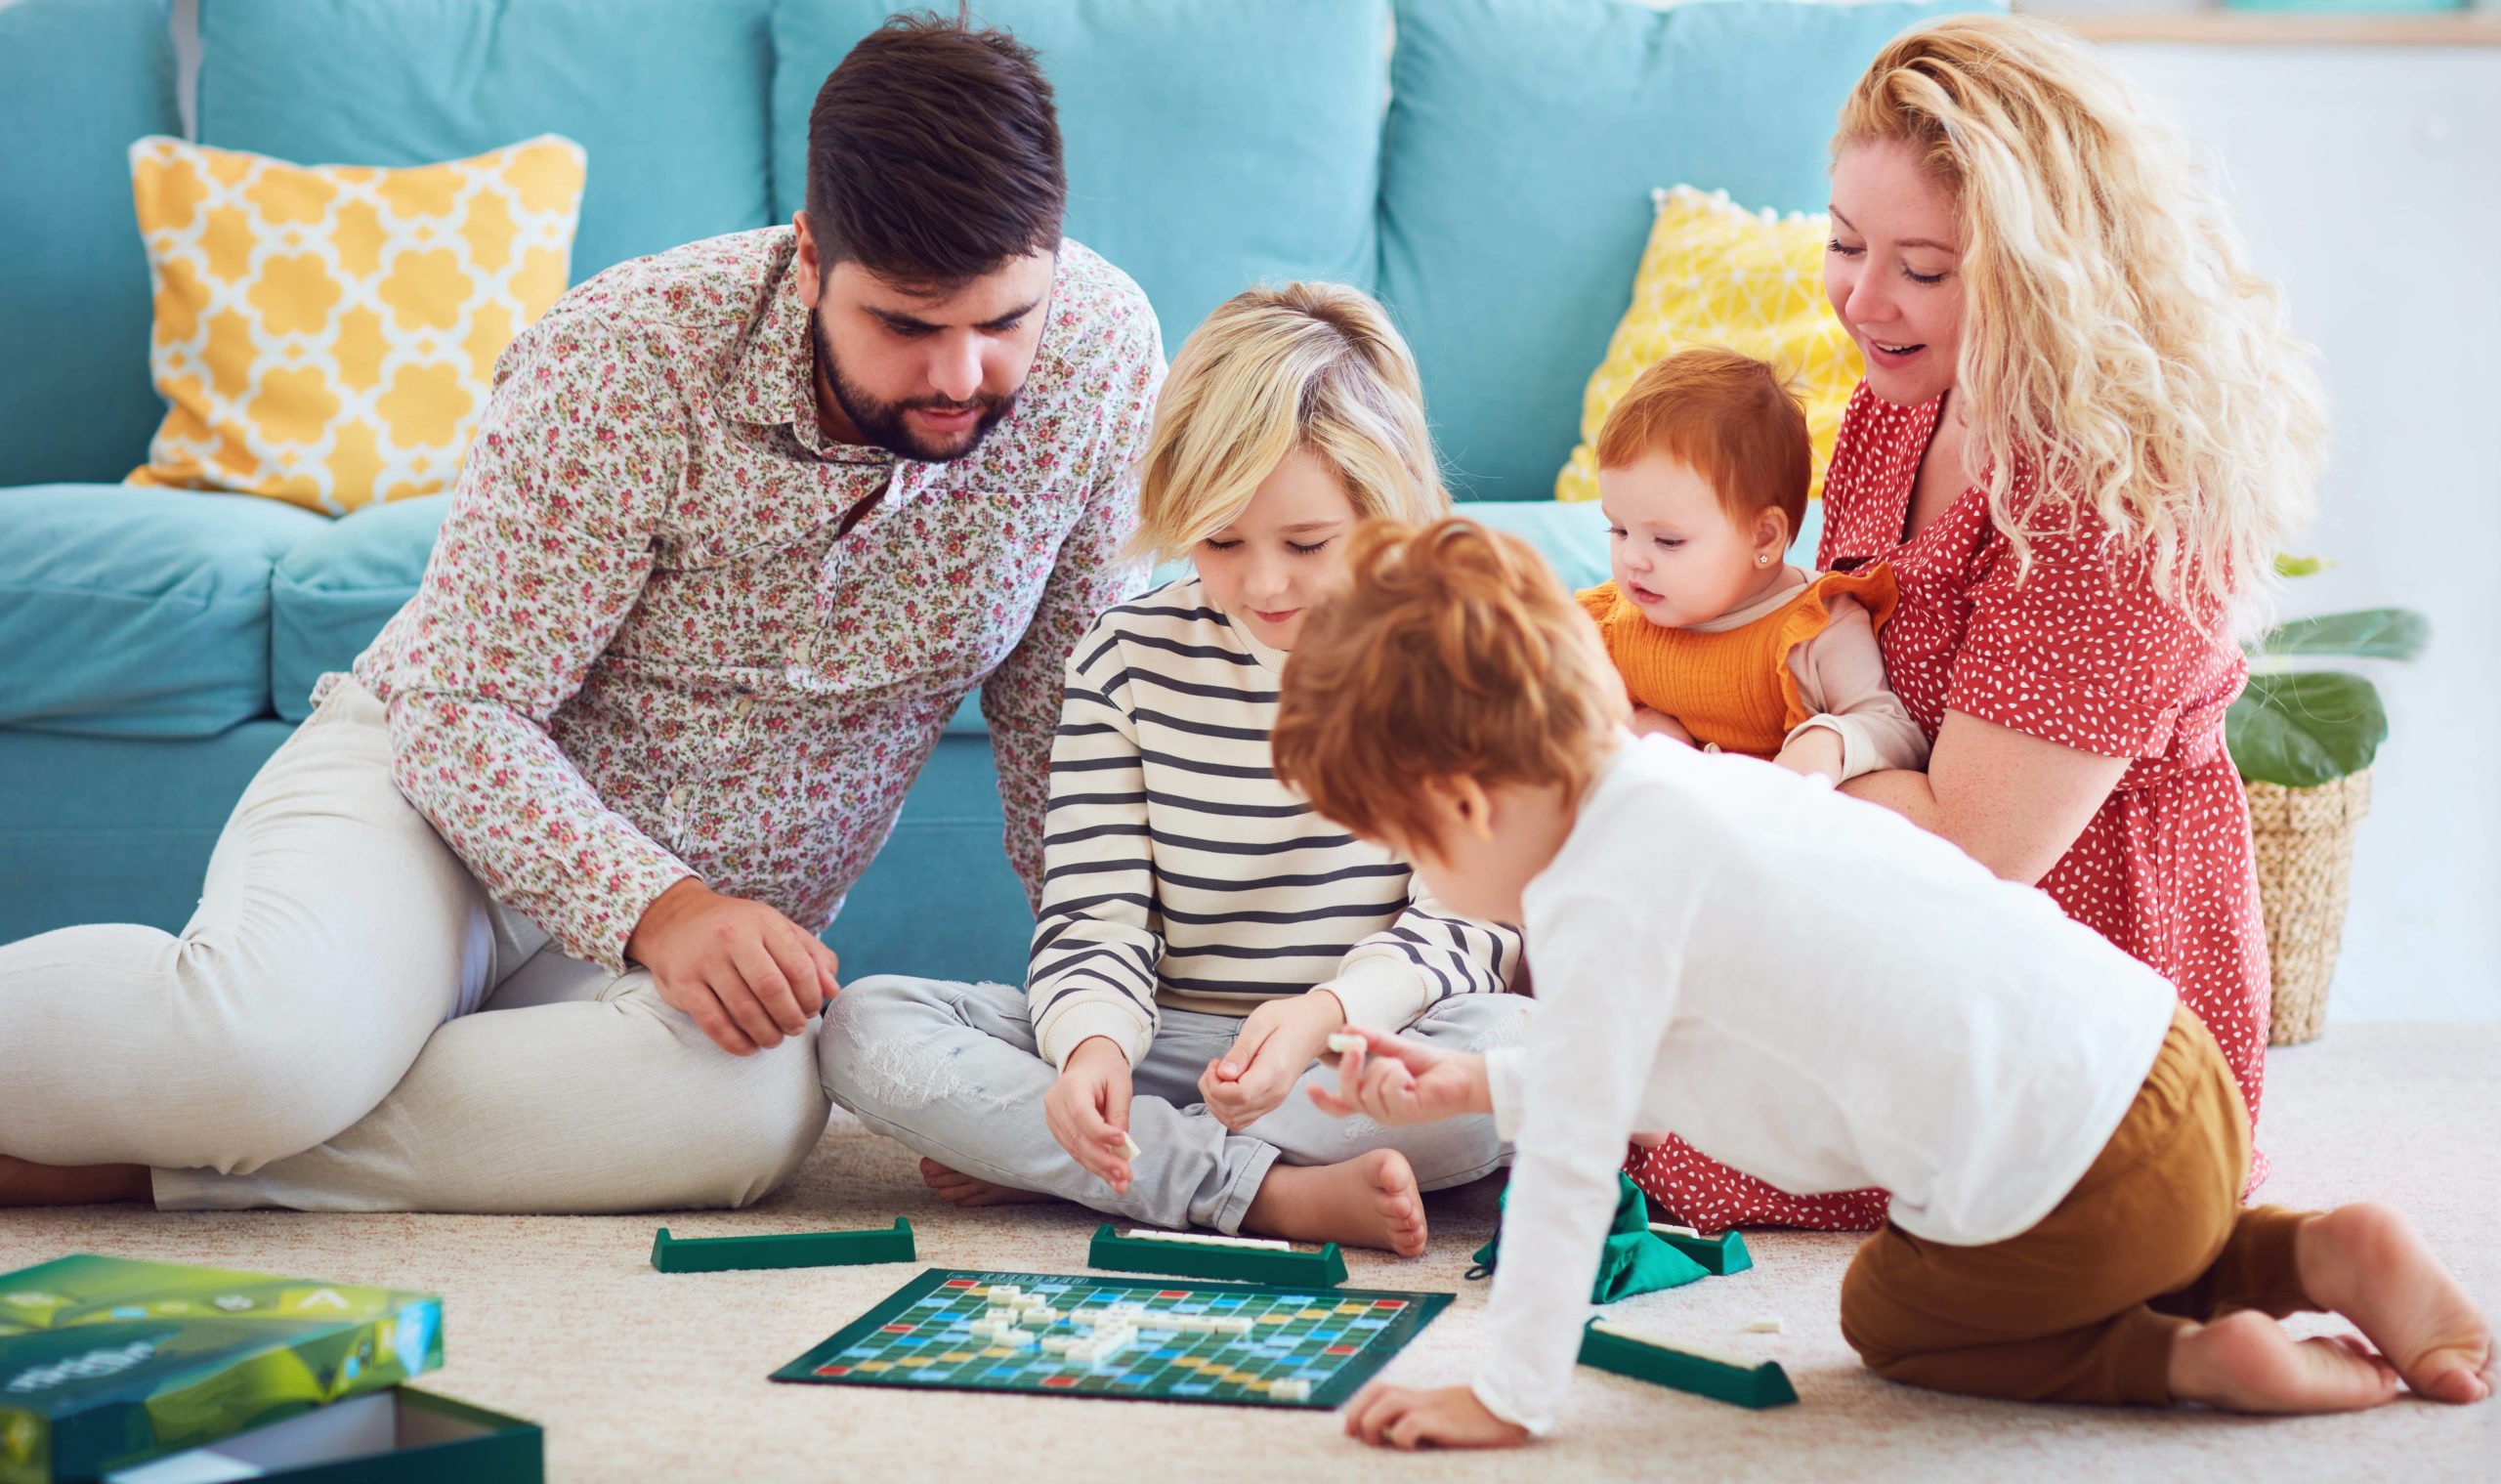 Enjoy game nights with family by playing brain games. 